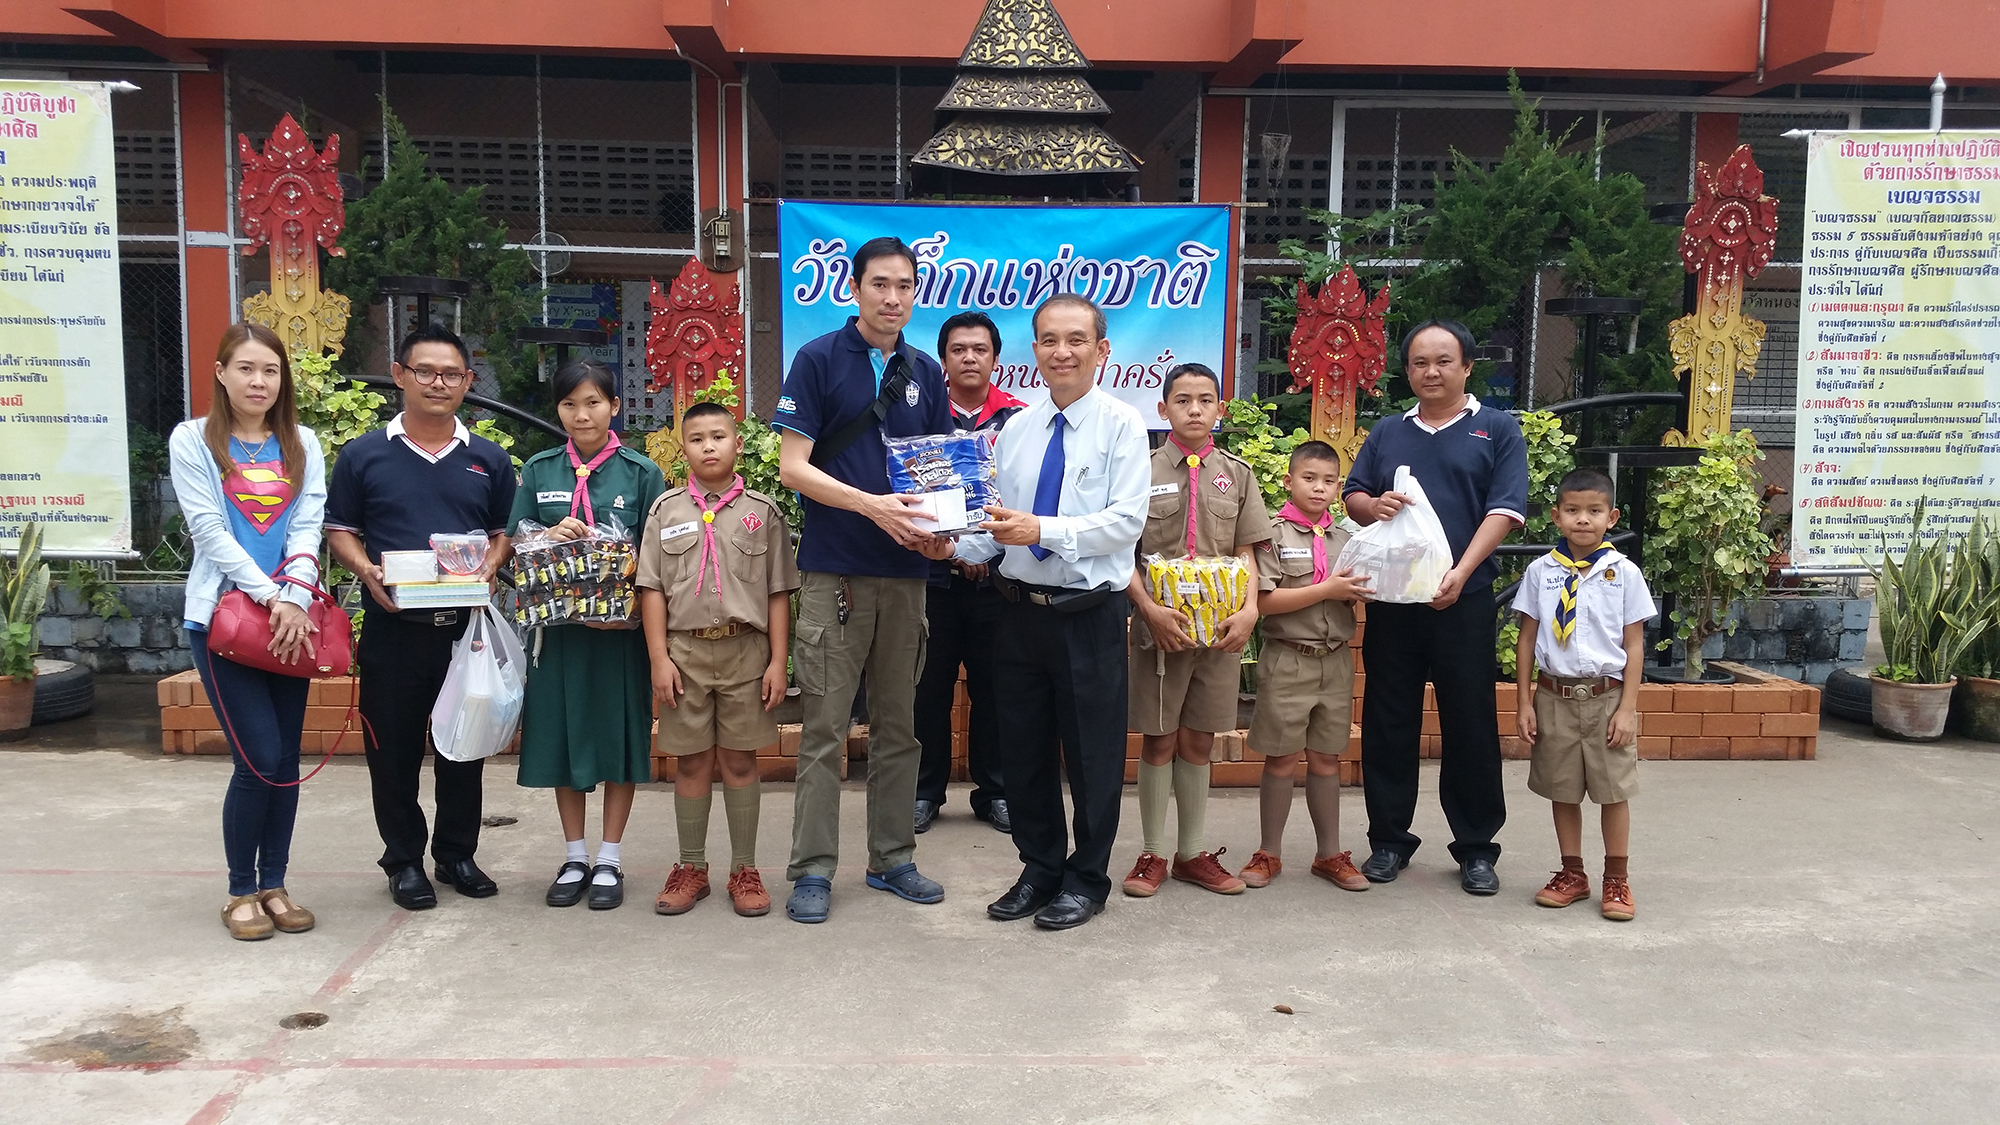 Sombat Tour provided fund and learning materials to children in Chiang Mai Province